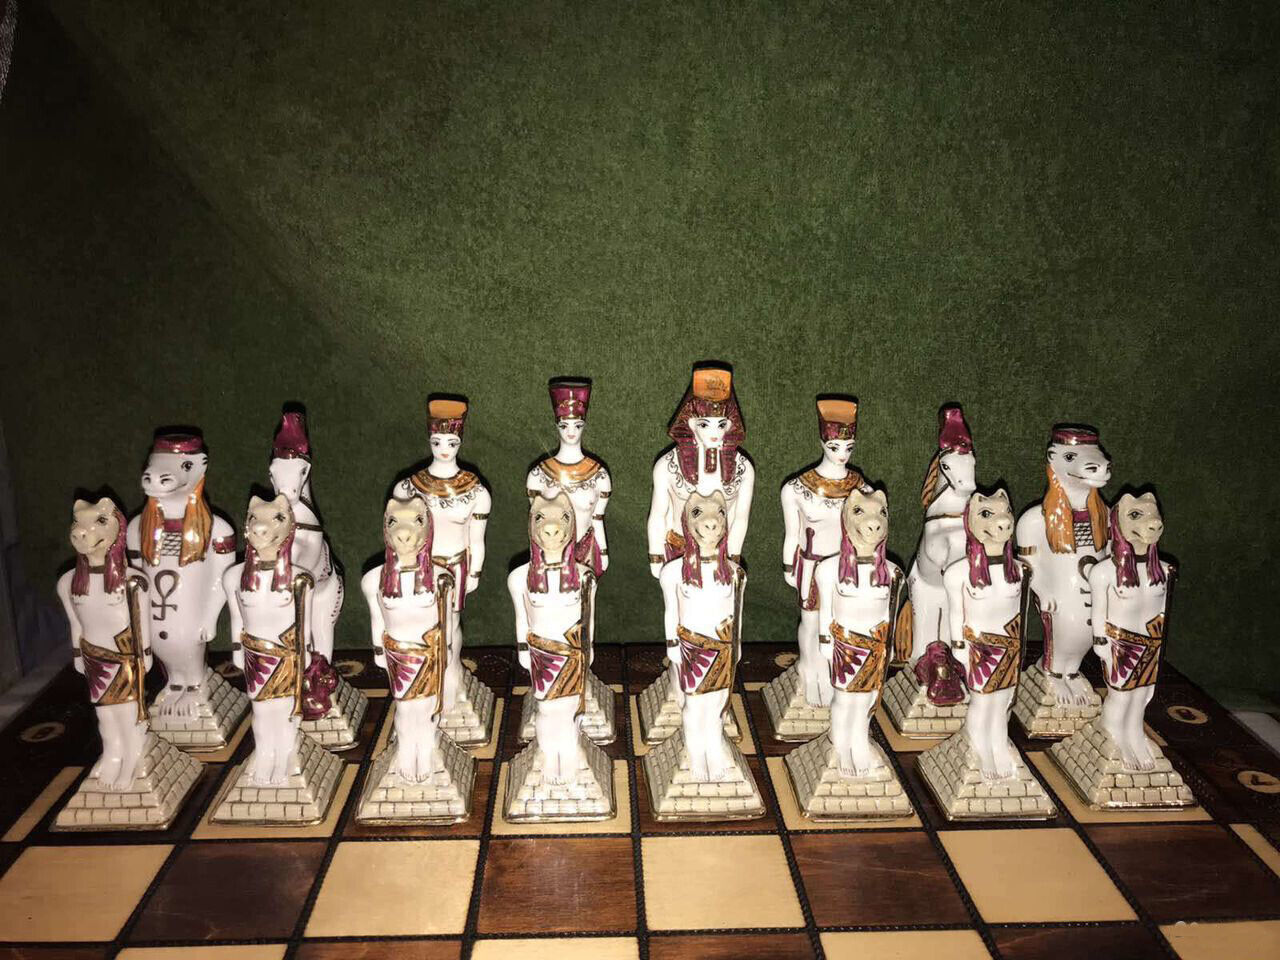 11595.Russian Porcelain Chess Pieces Egyptian Style. Kislovodsk